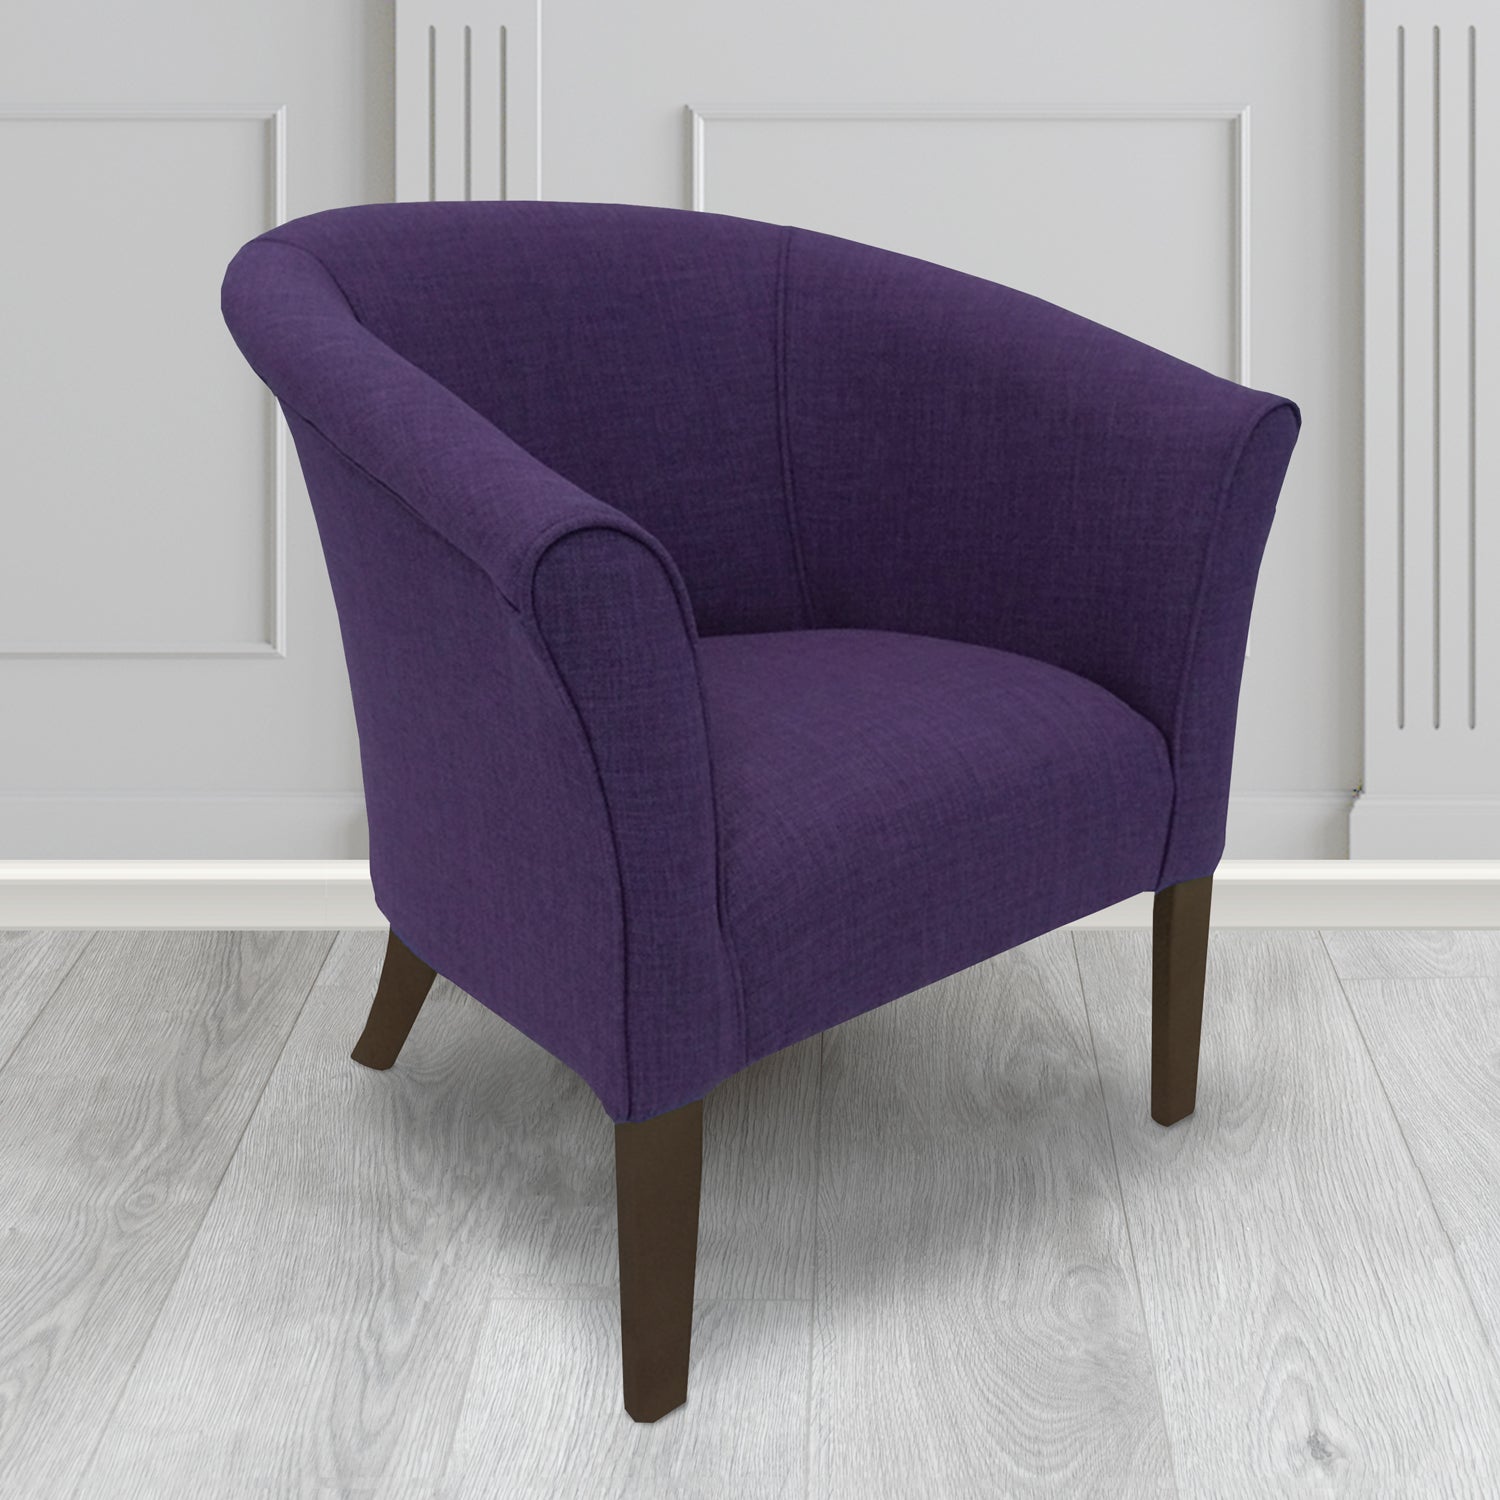 Quill Tub Chair in Linetta Violet Crib 5 Plain Fabric - Antimicrobial, Stain Resistant & Waterproof - The Tub Chair Shop